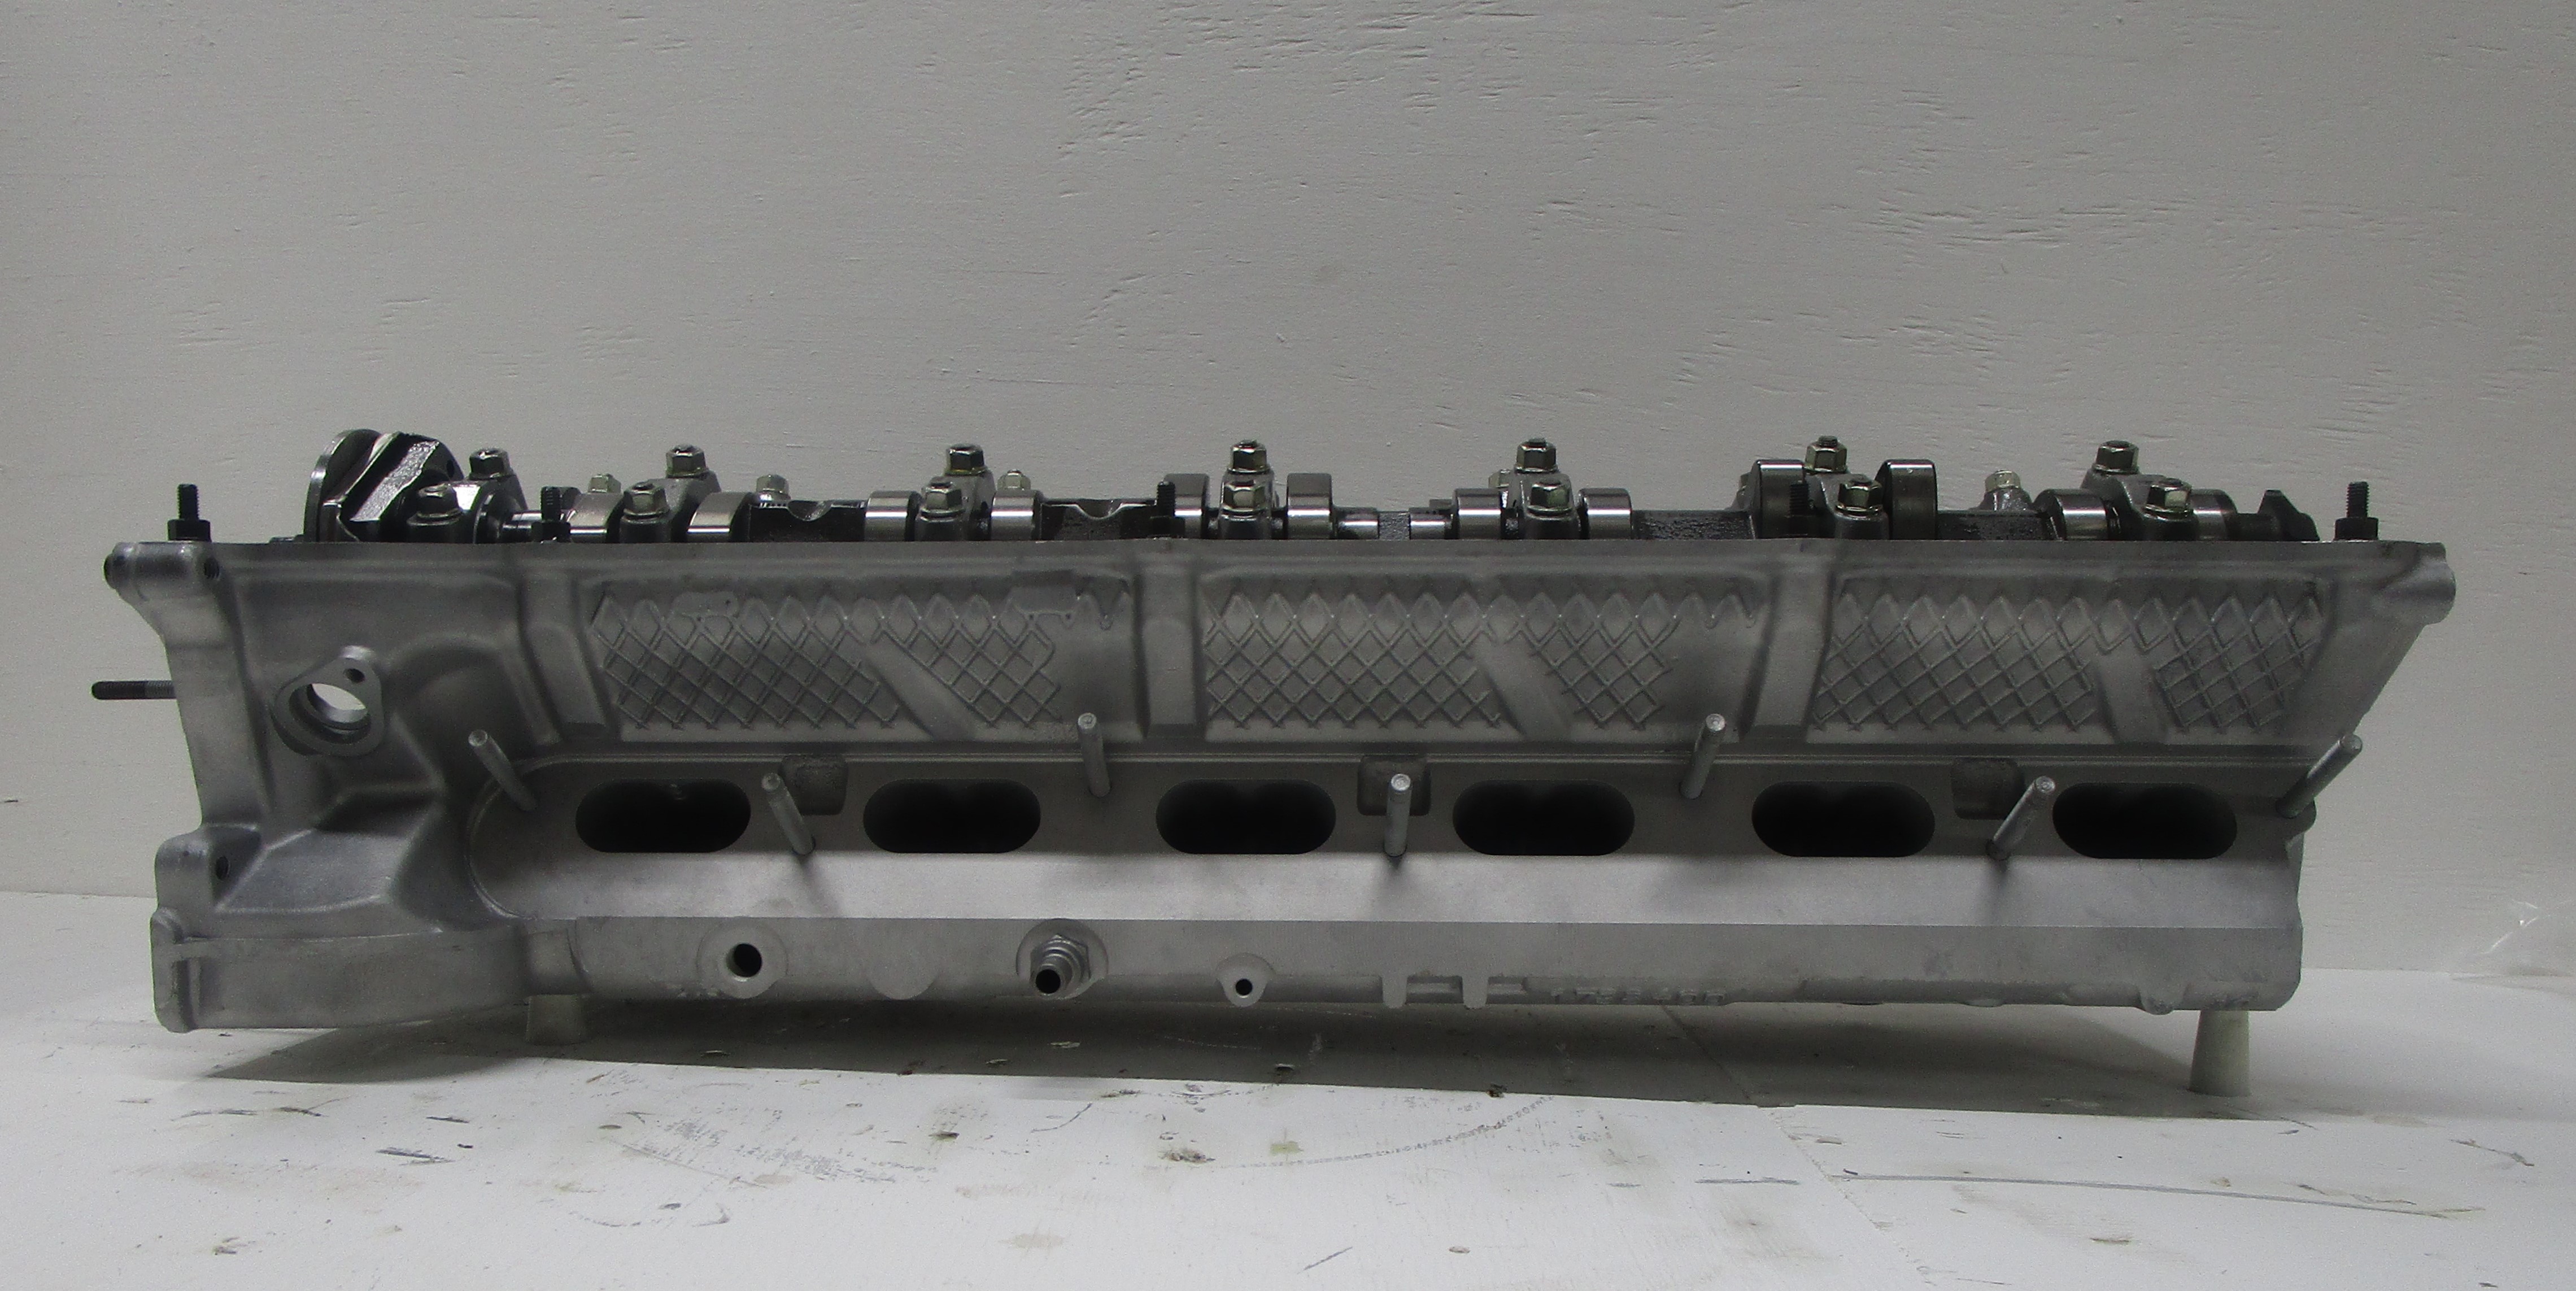 1991-1995 BMW 325i/325iS 2.5L Reconditioned Cylinder Head w/Cams Casting #1738400 ($200 Core Charge)